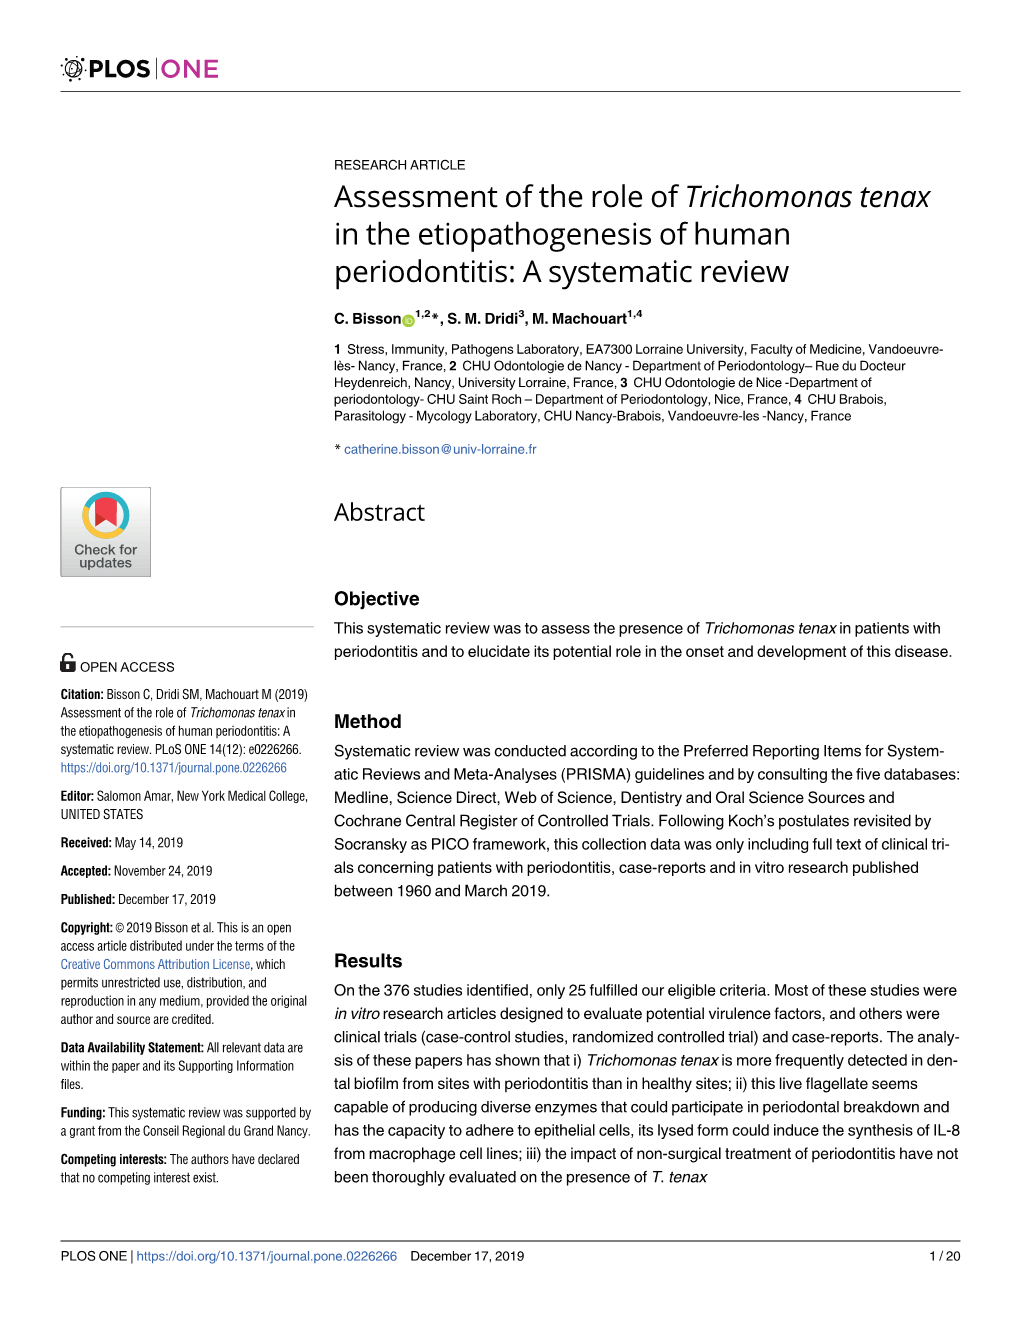 Assessment of the Role of Trichomonas Tenax in the Etiopathogenesis of Human Periodontitis: a Systematic Review